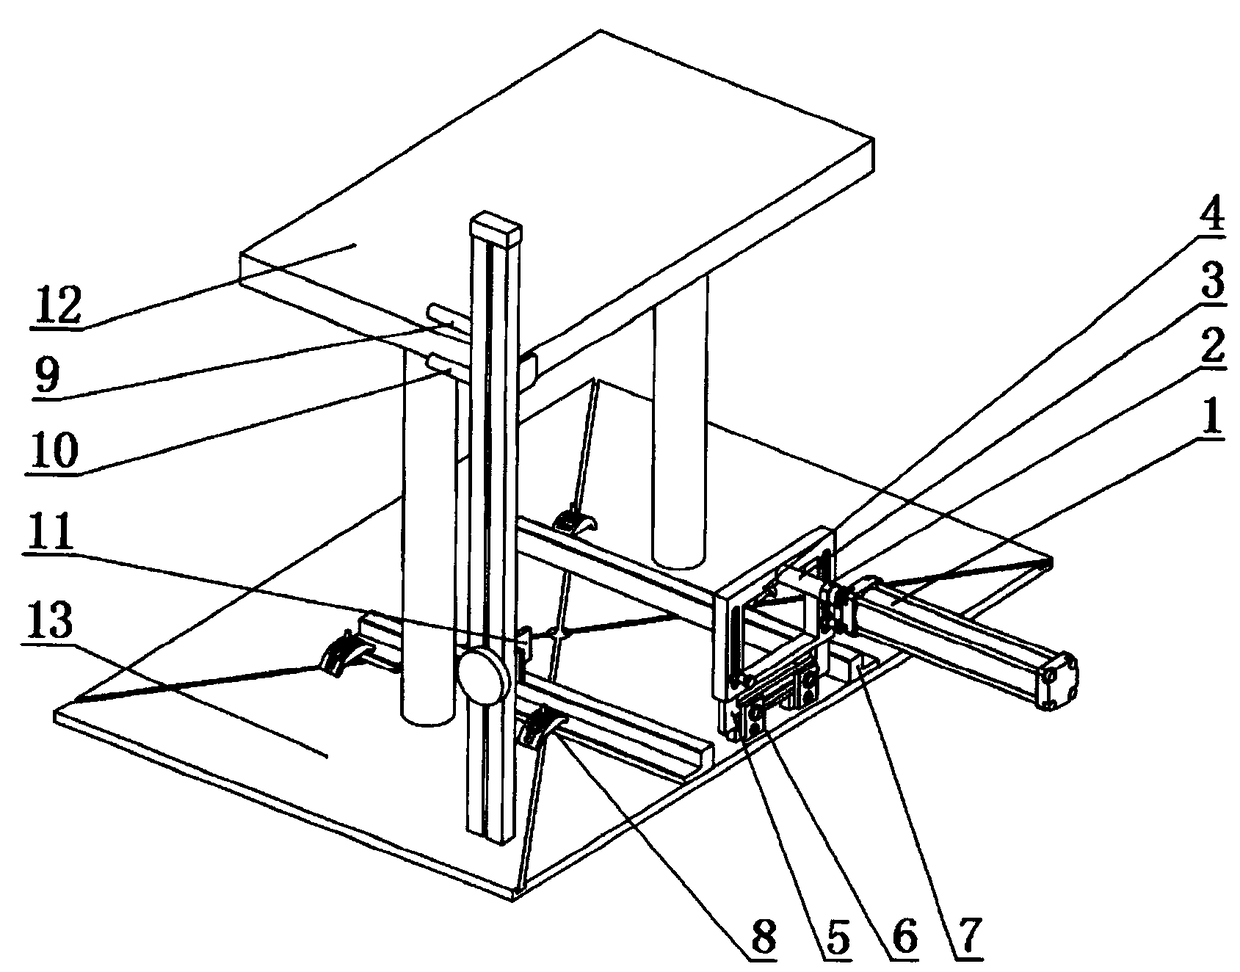 An ejector device for moving molds on a wax pressing machine